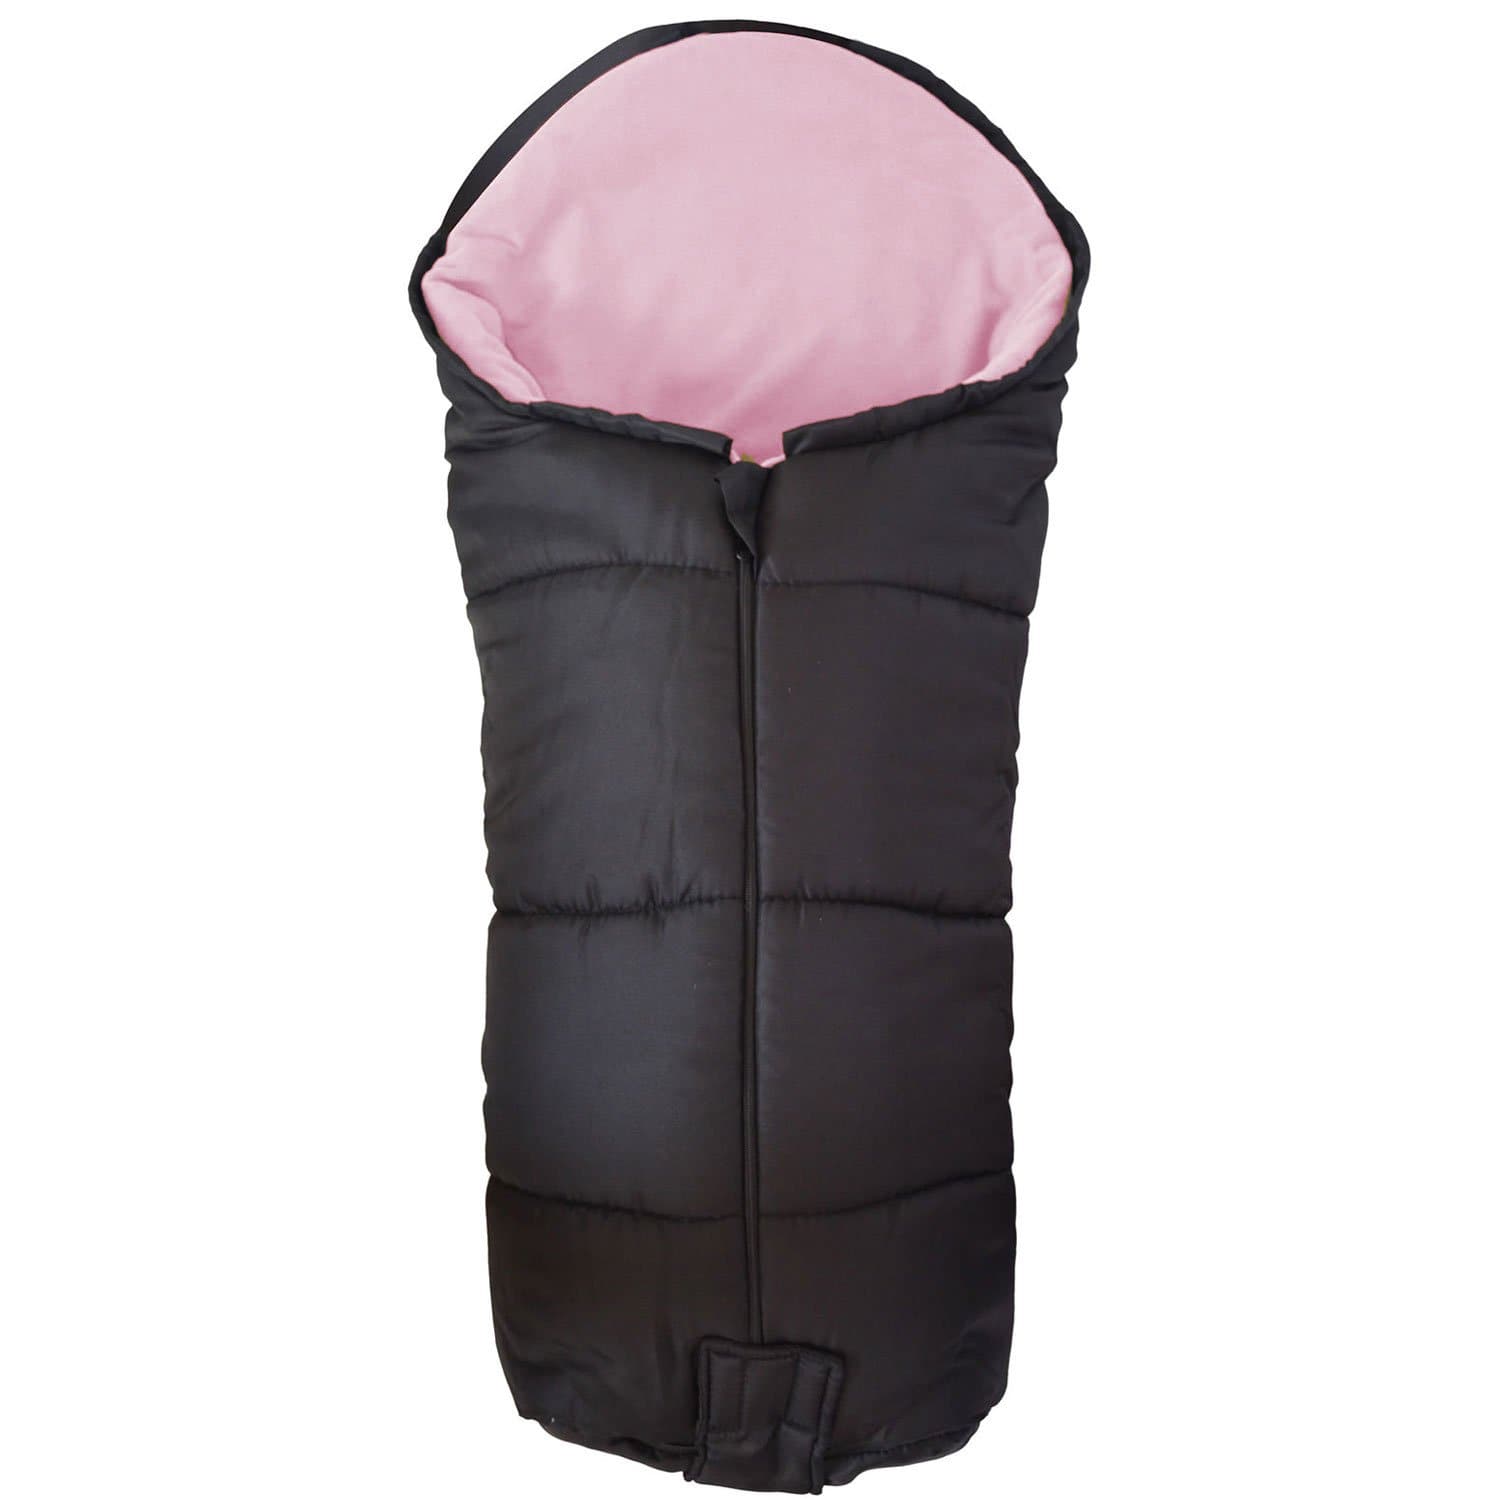 Deluxe Footmuff / Cosy Toes Compatible with Babybus - For Your Little One